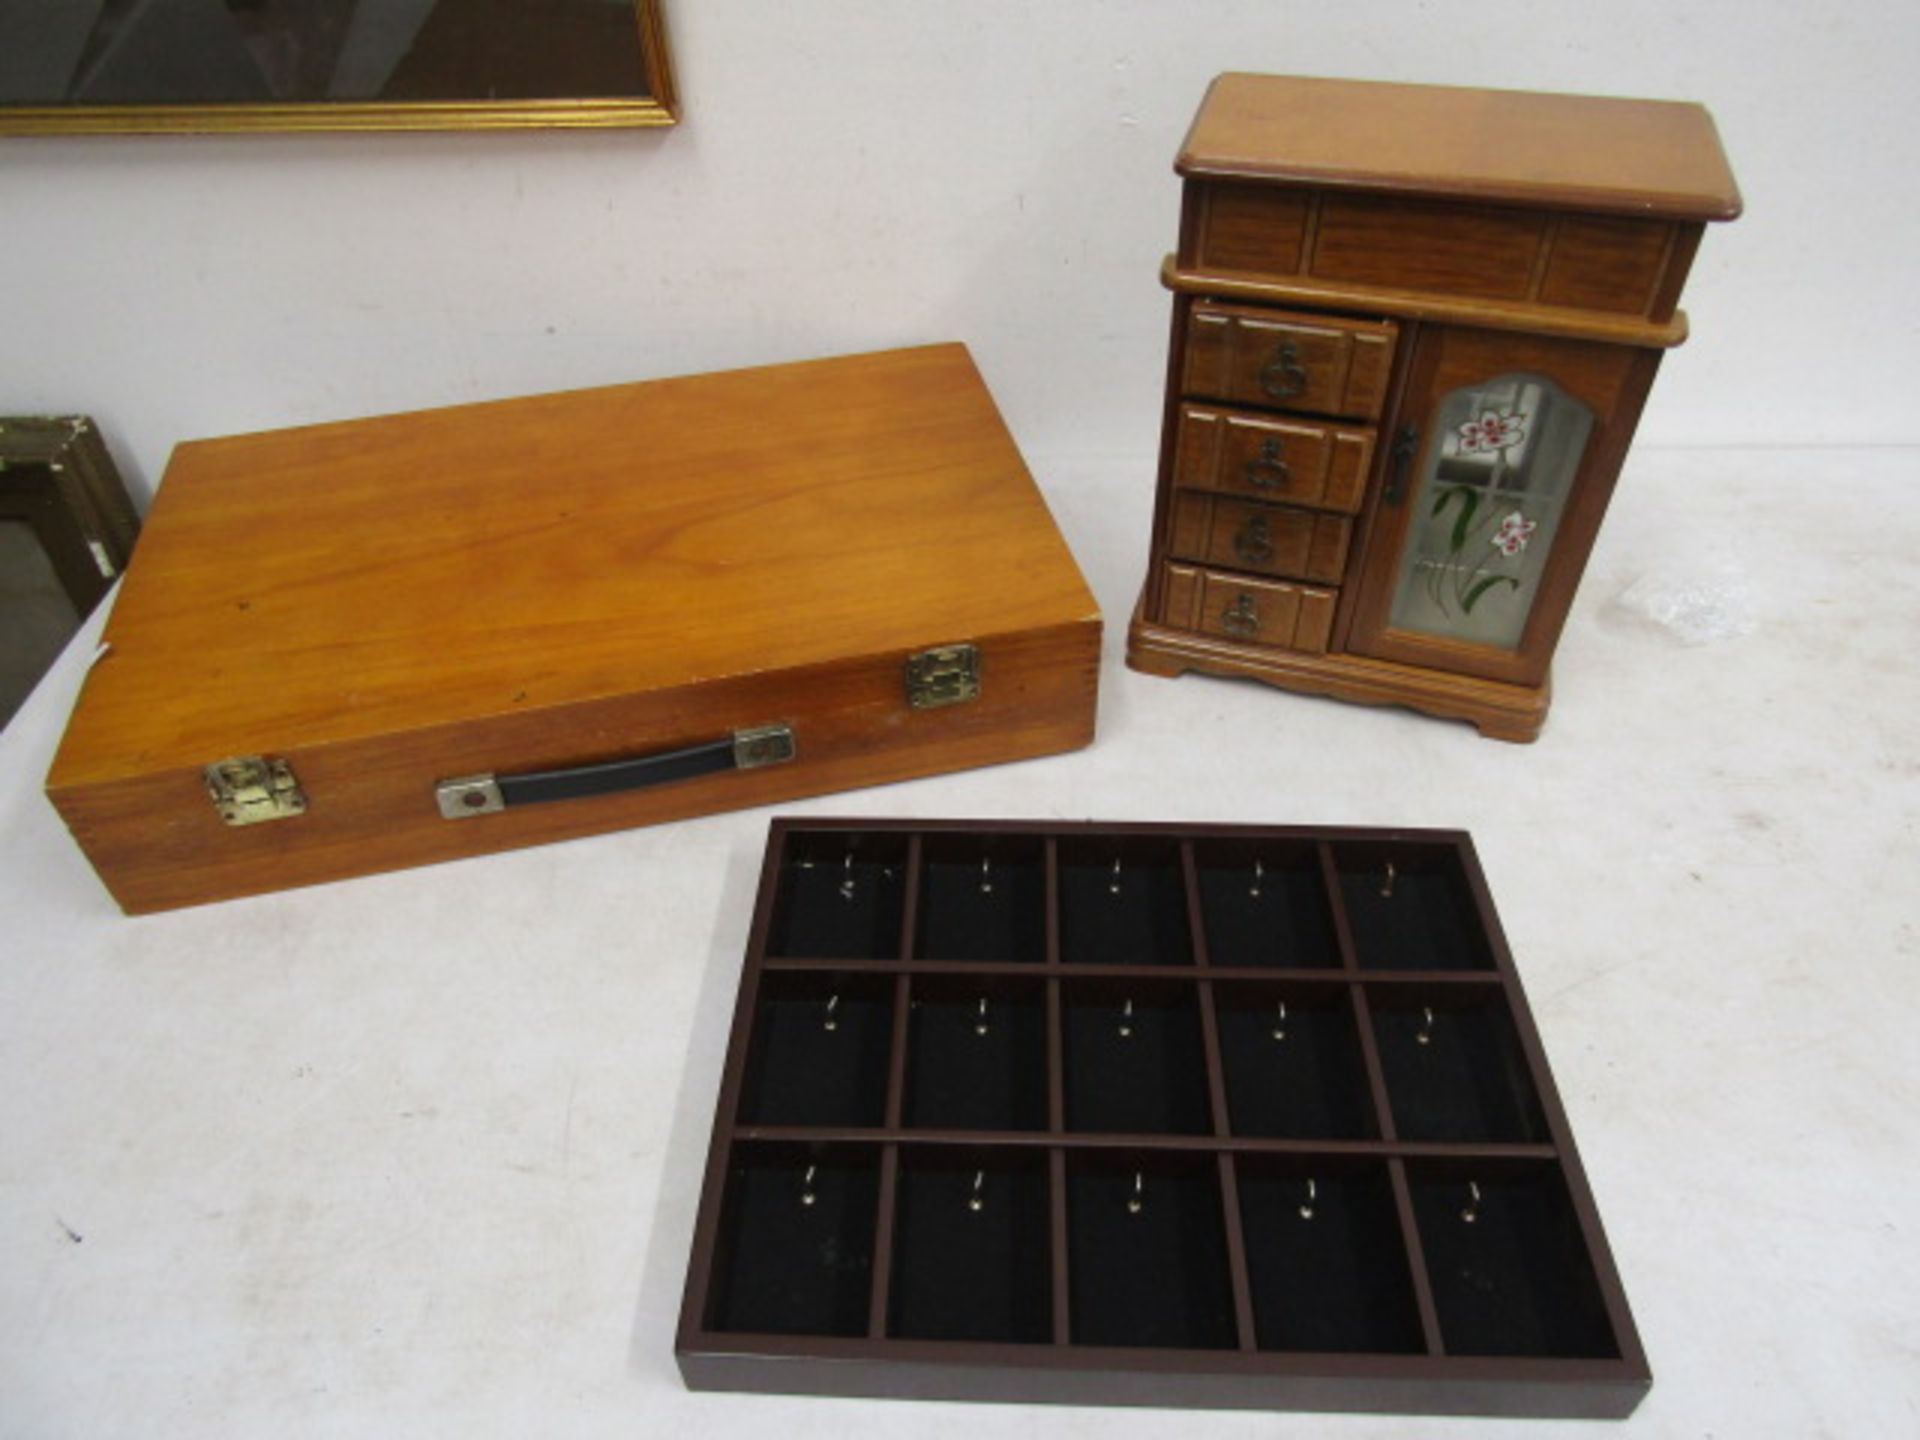 A jewellery box, display case and jewellery display stand